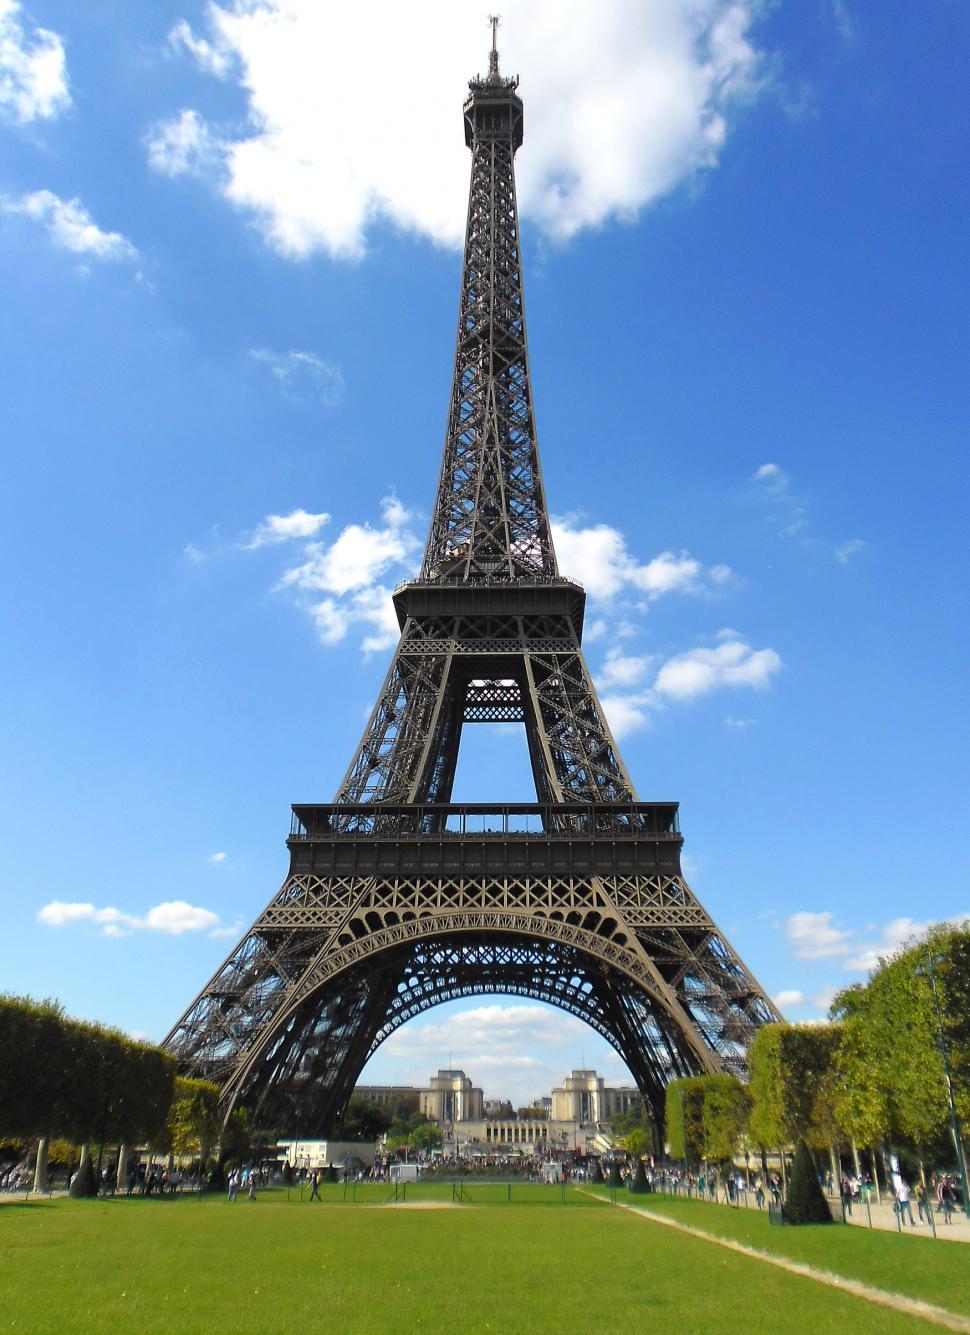 Download Free Stock Photo of The Eiffel Tower in Paris - France 